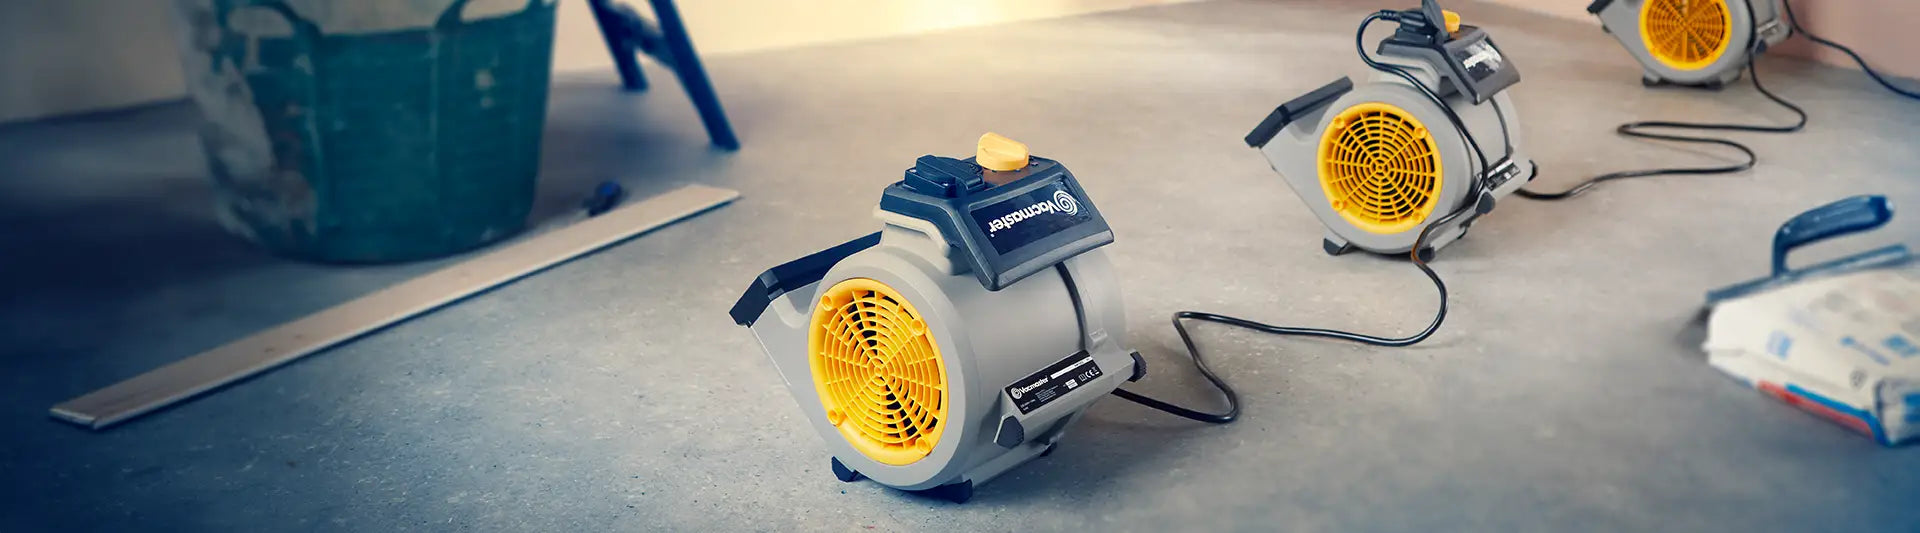 Vacmaster Air Mover and Fans